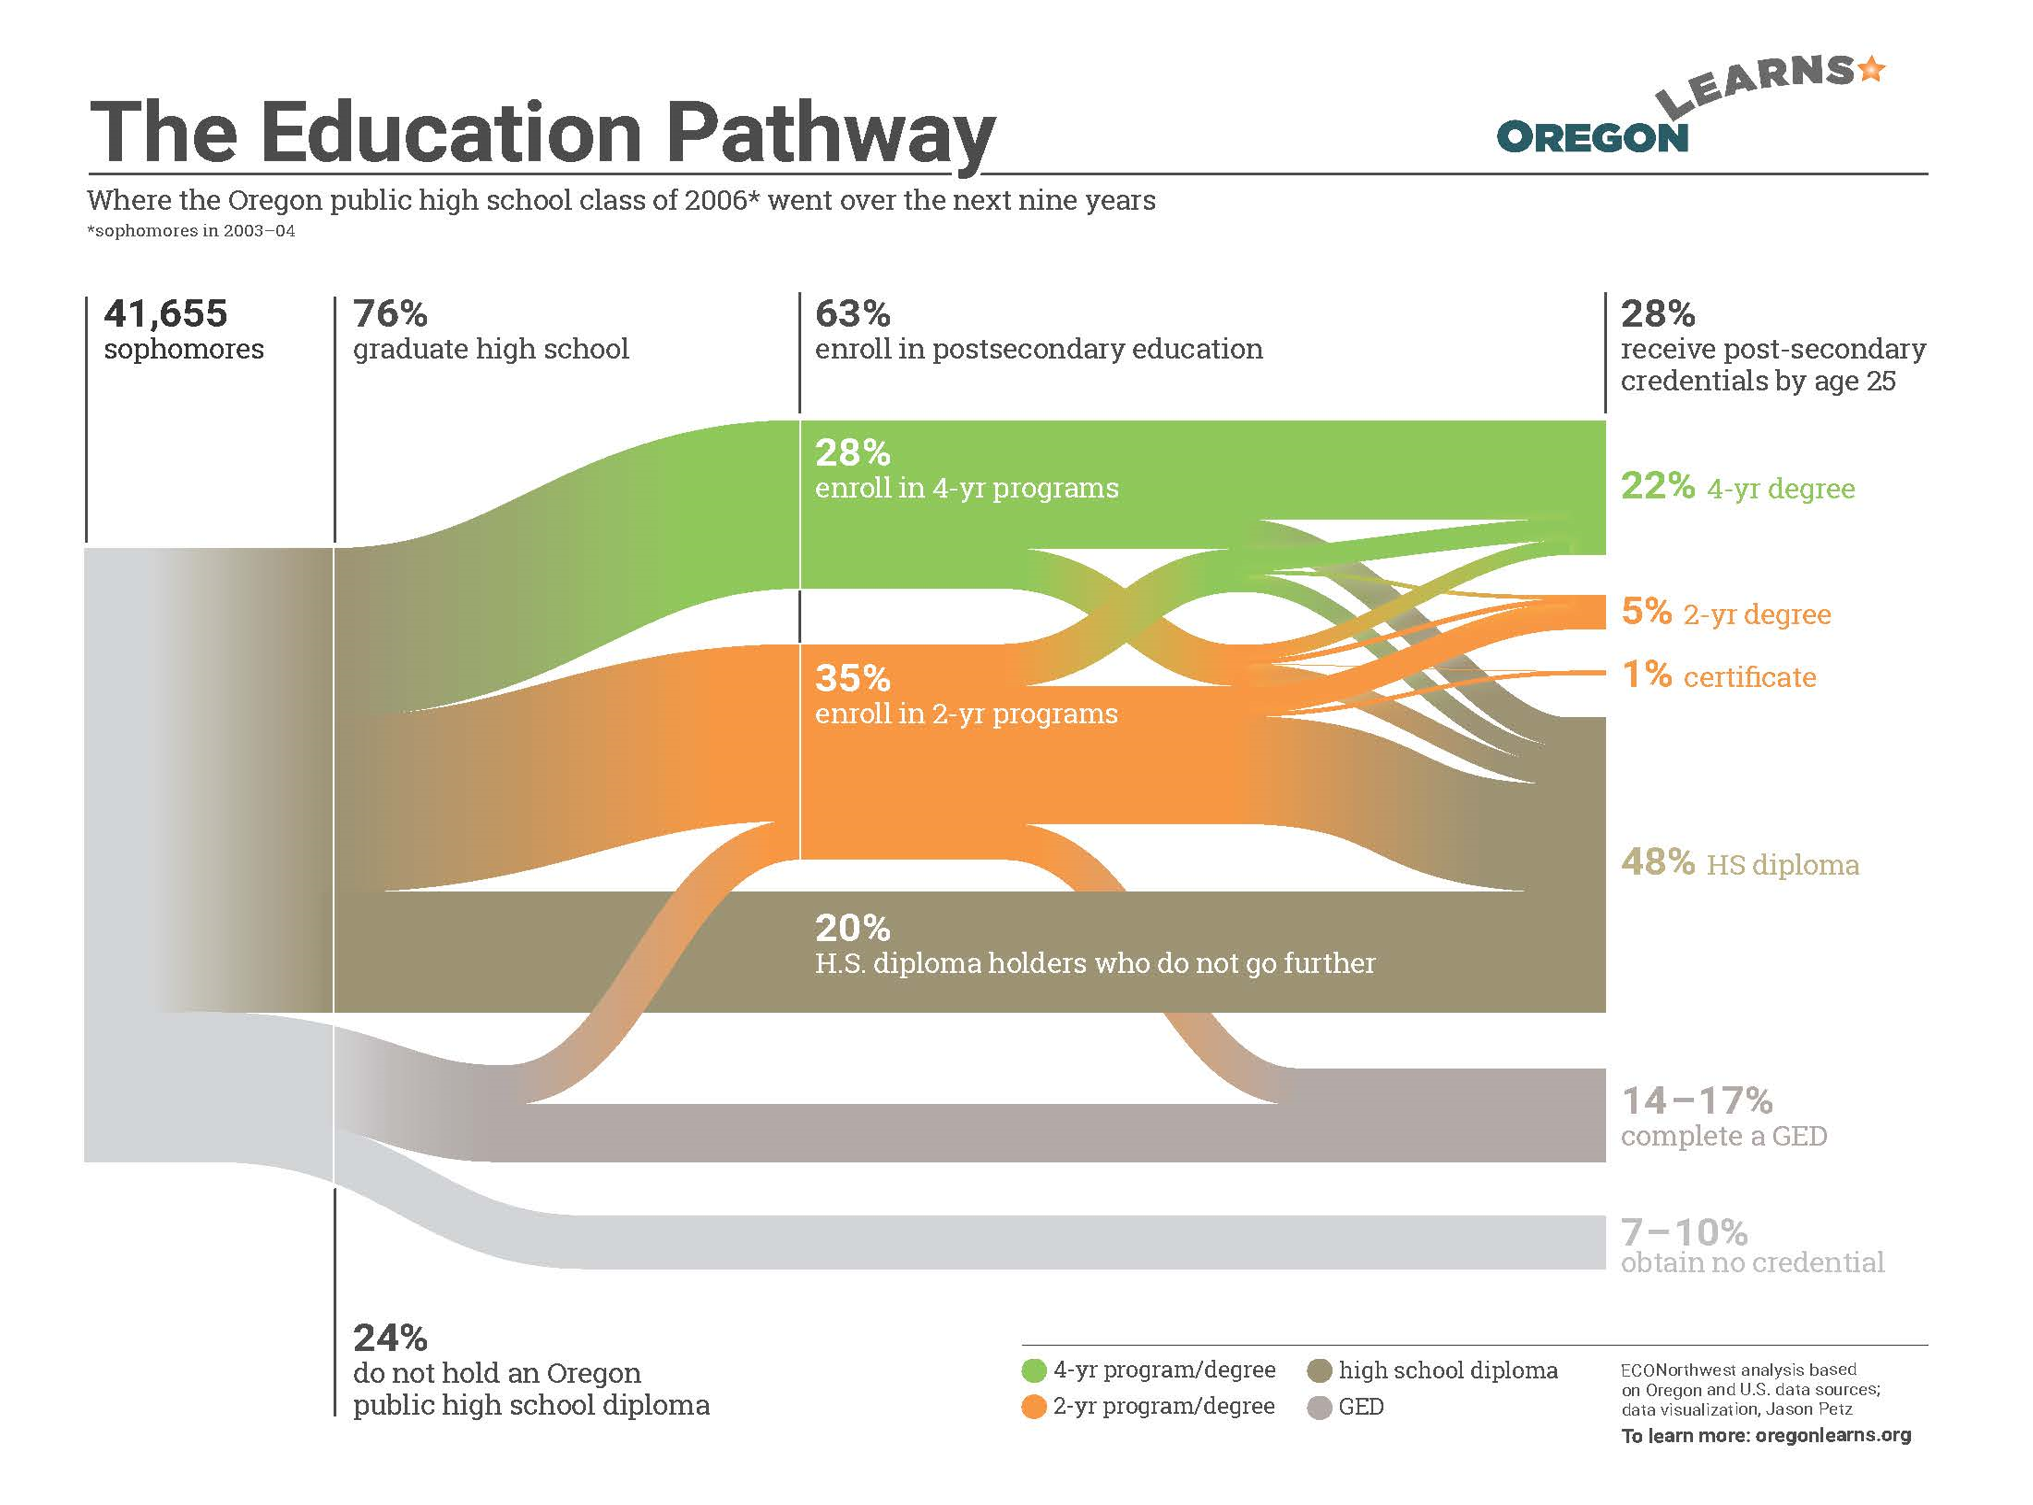 State of Oregon: Research - Education Pathway Data